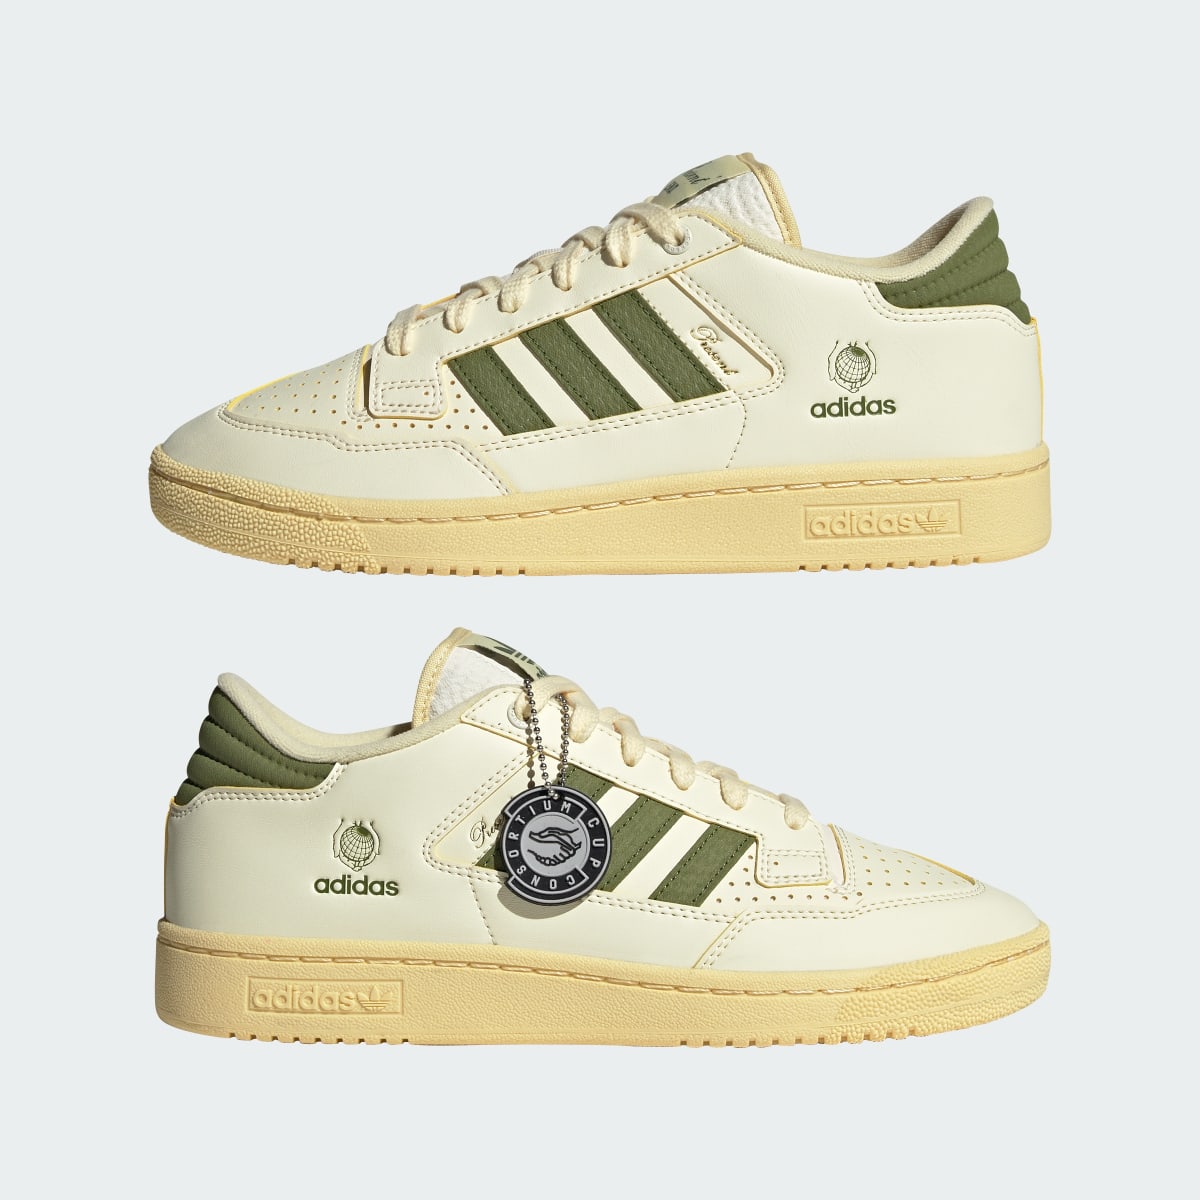 Adidas Centennial Low END. Trainers. 7